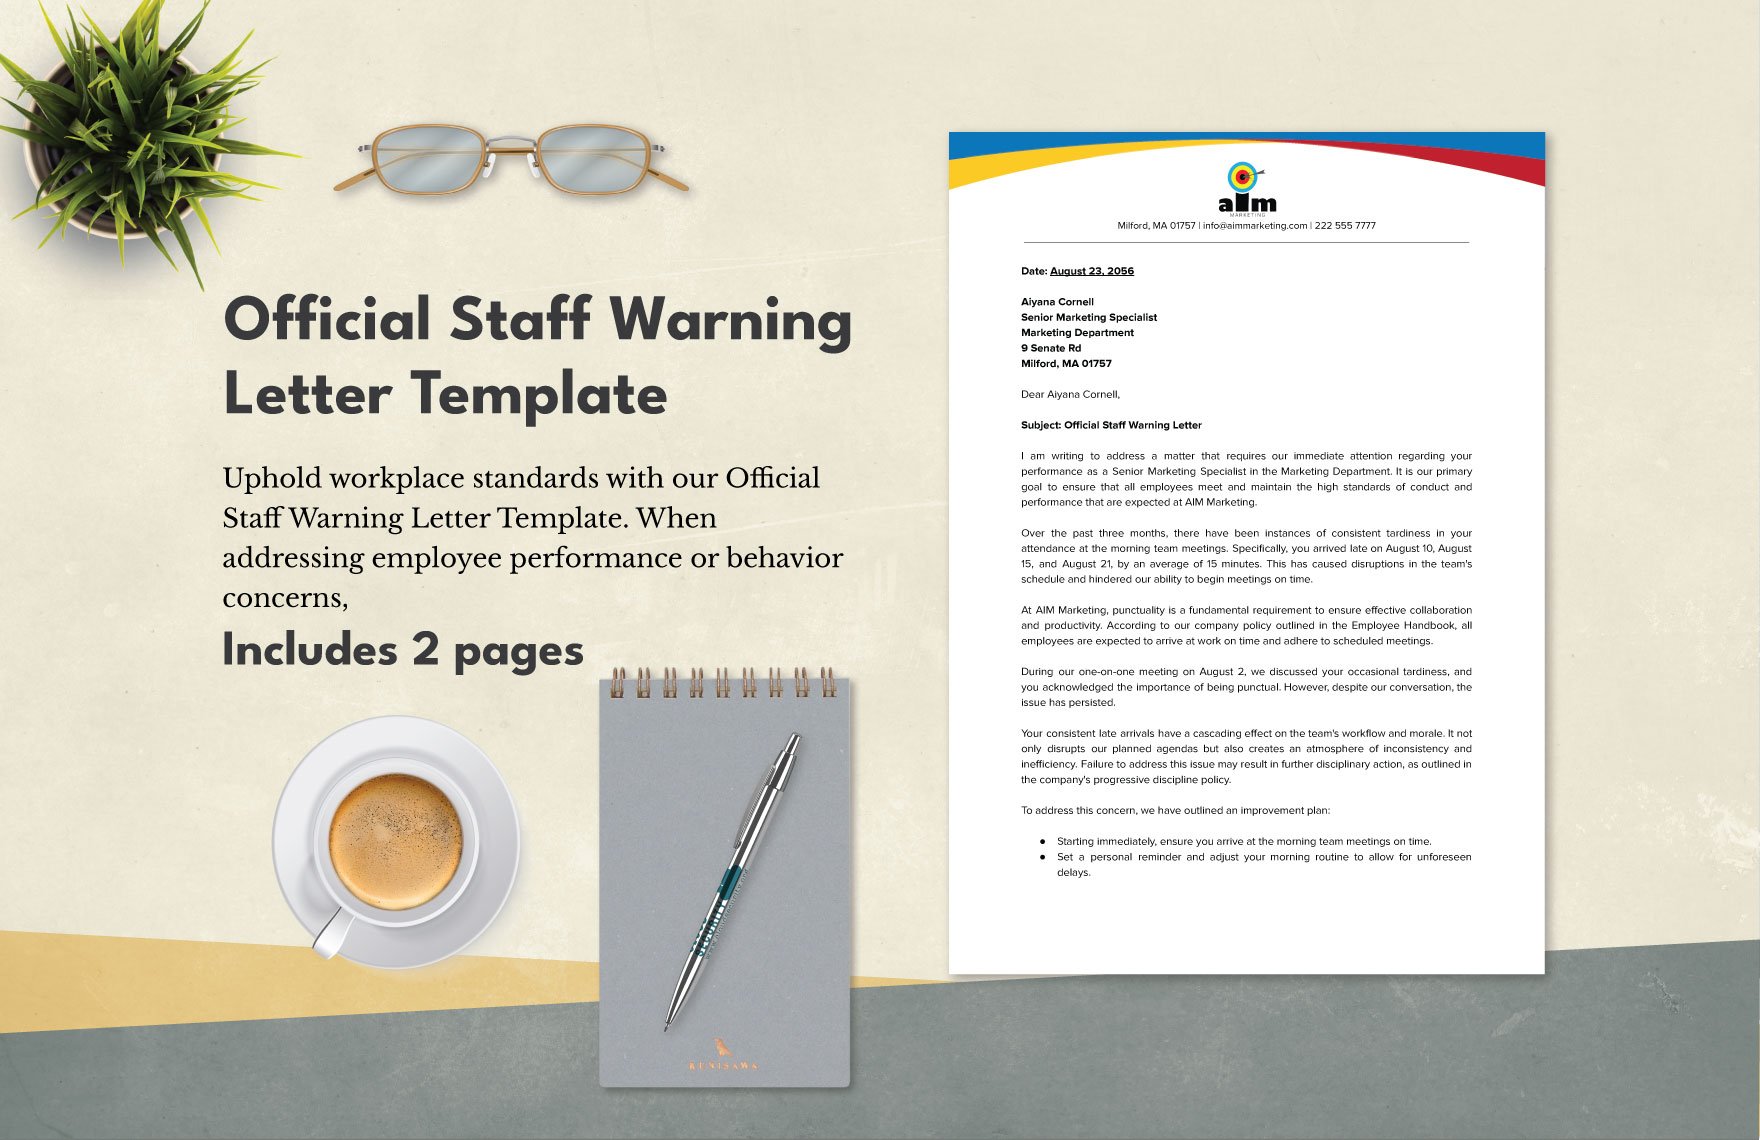 Official Staff Warning Letter Template